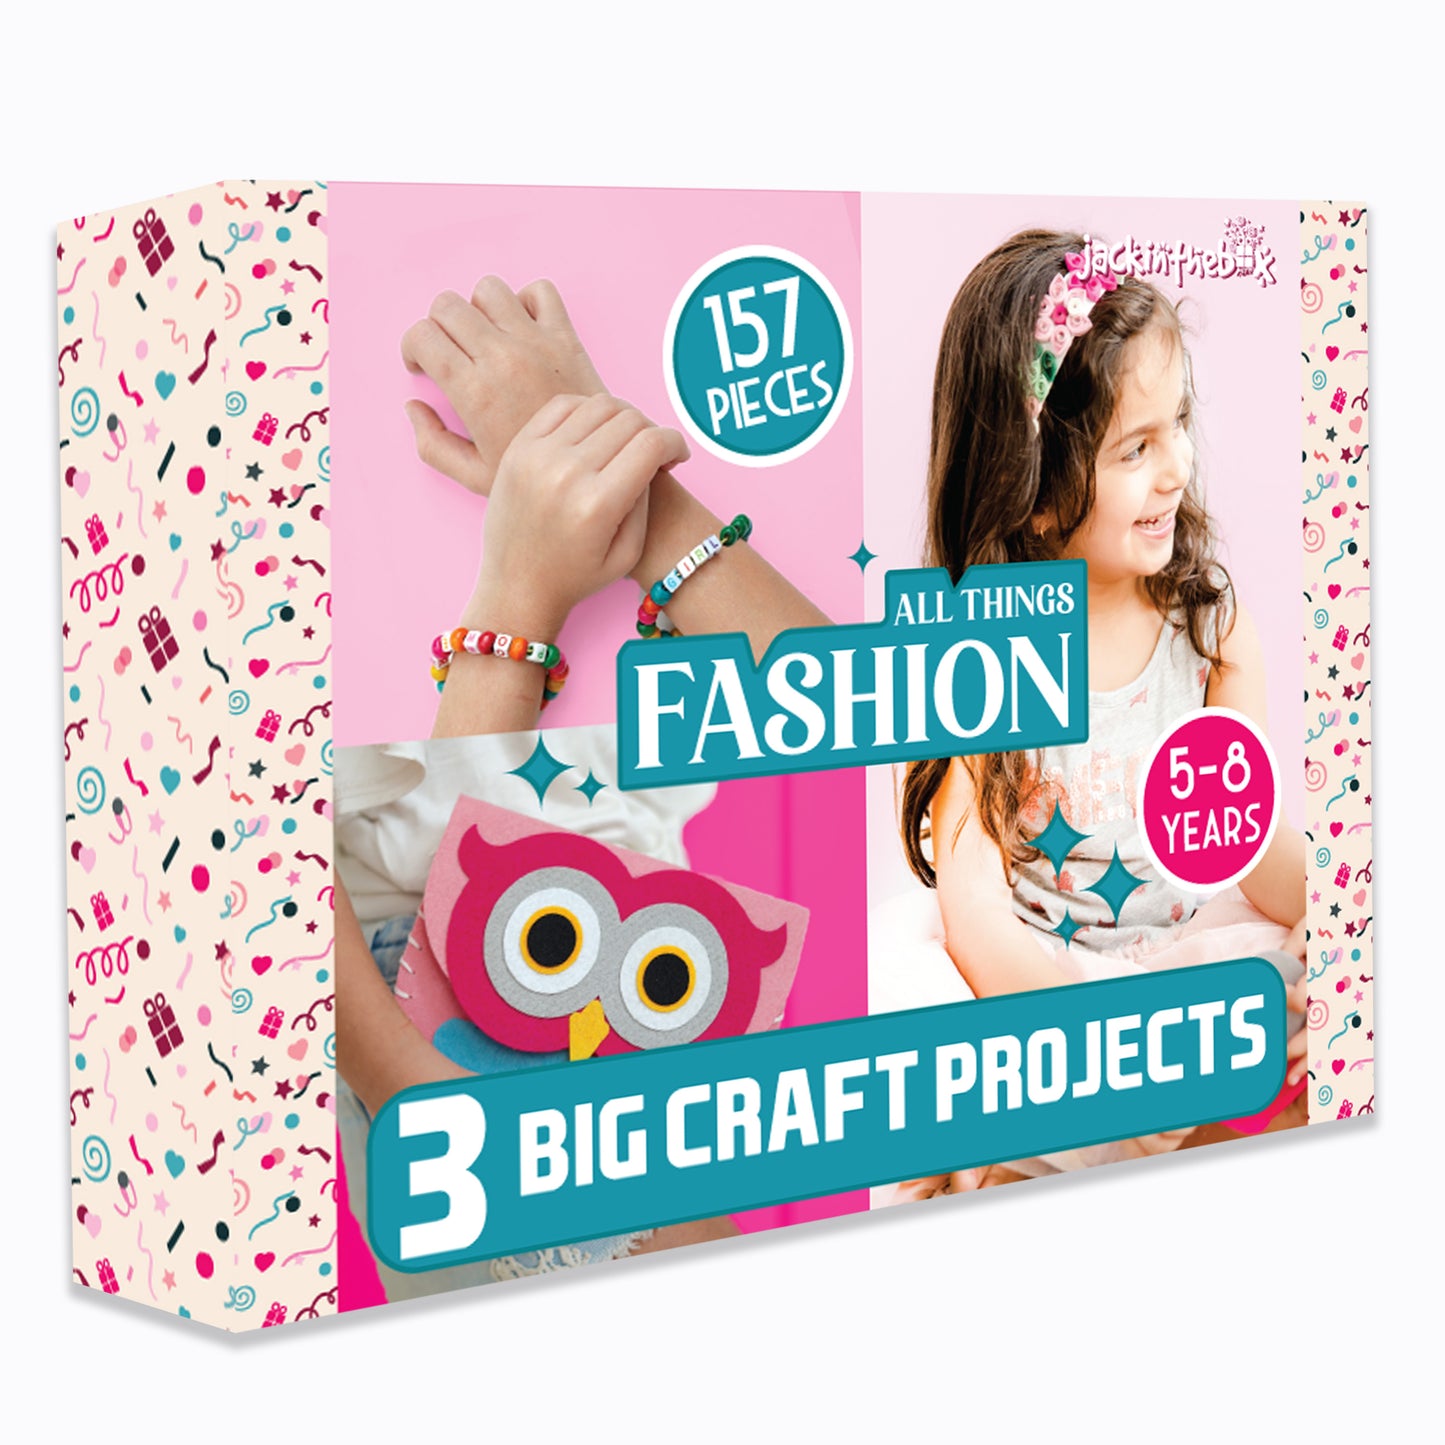 Fashion Themed Art and Craft Kit for Girls | 3 Craft Projects in 1 Box | Best Girl Gift for Ages 6 7 8 9 10 Years | Includes Beautiful Felt and Foam Embellishments (Little Fashionista 3-in-1)